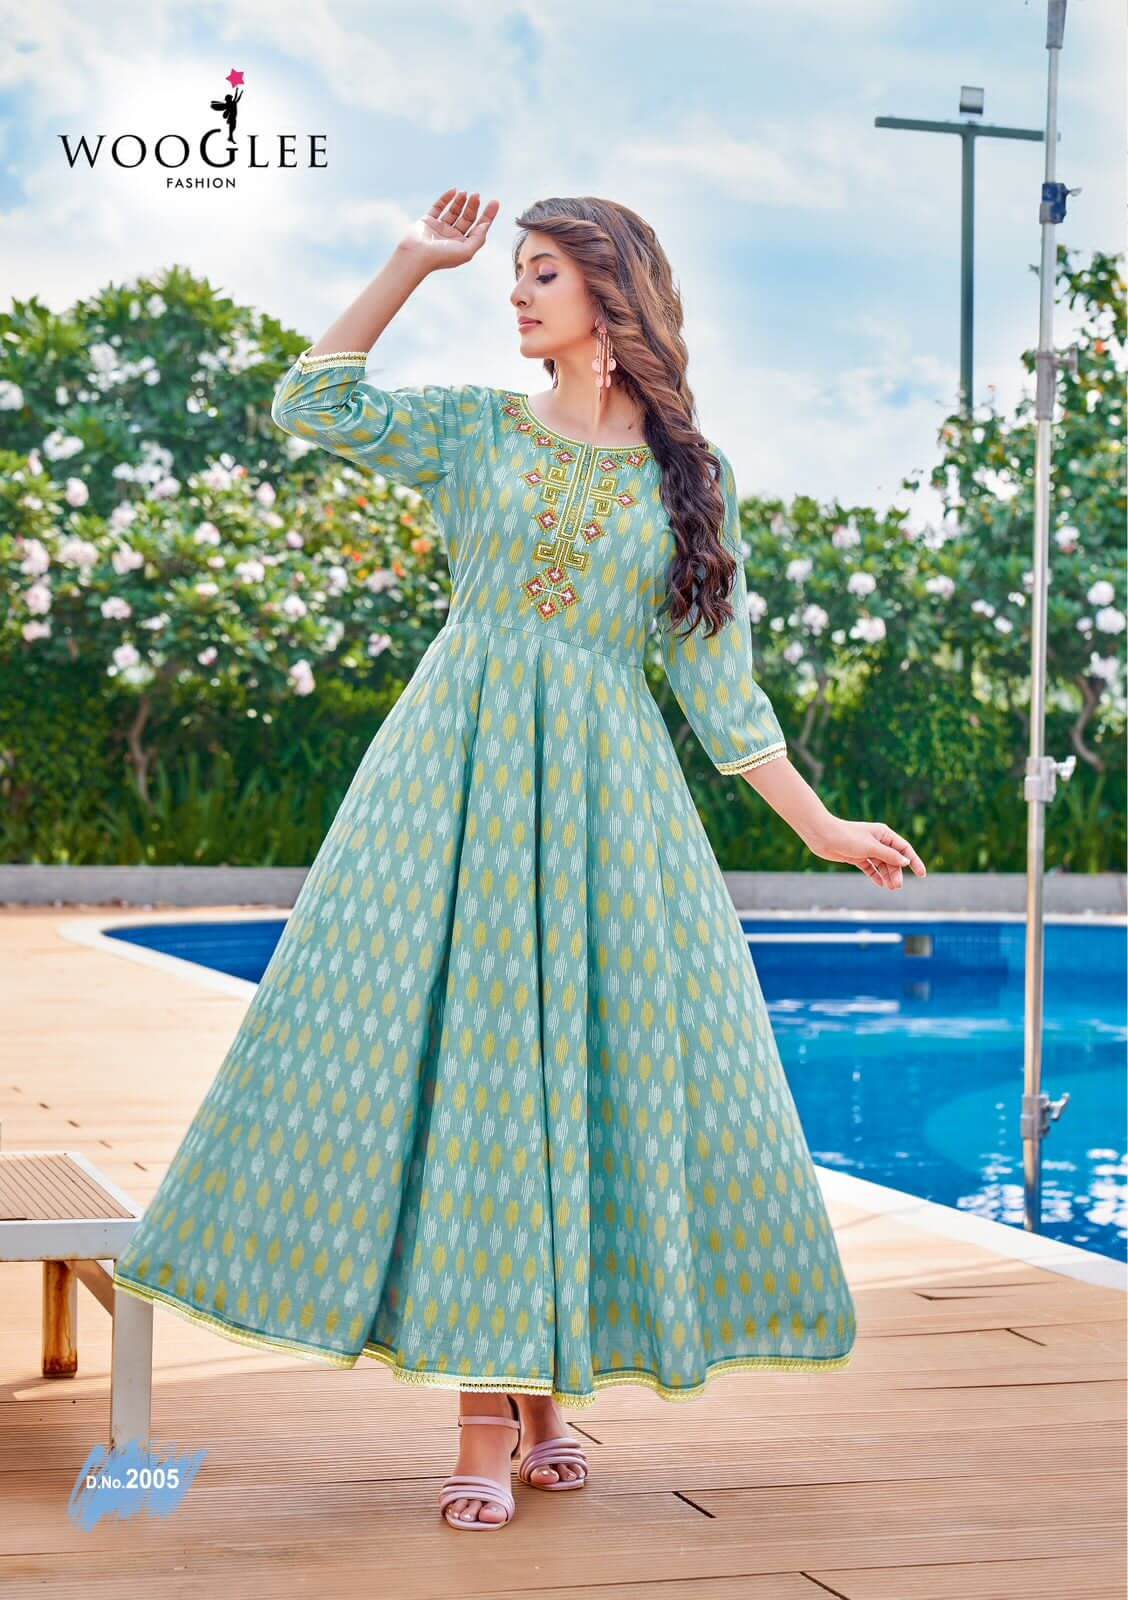 Wooglee Fashion Avsar Gowns Catalog collection 6